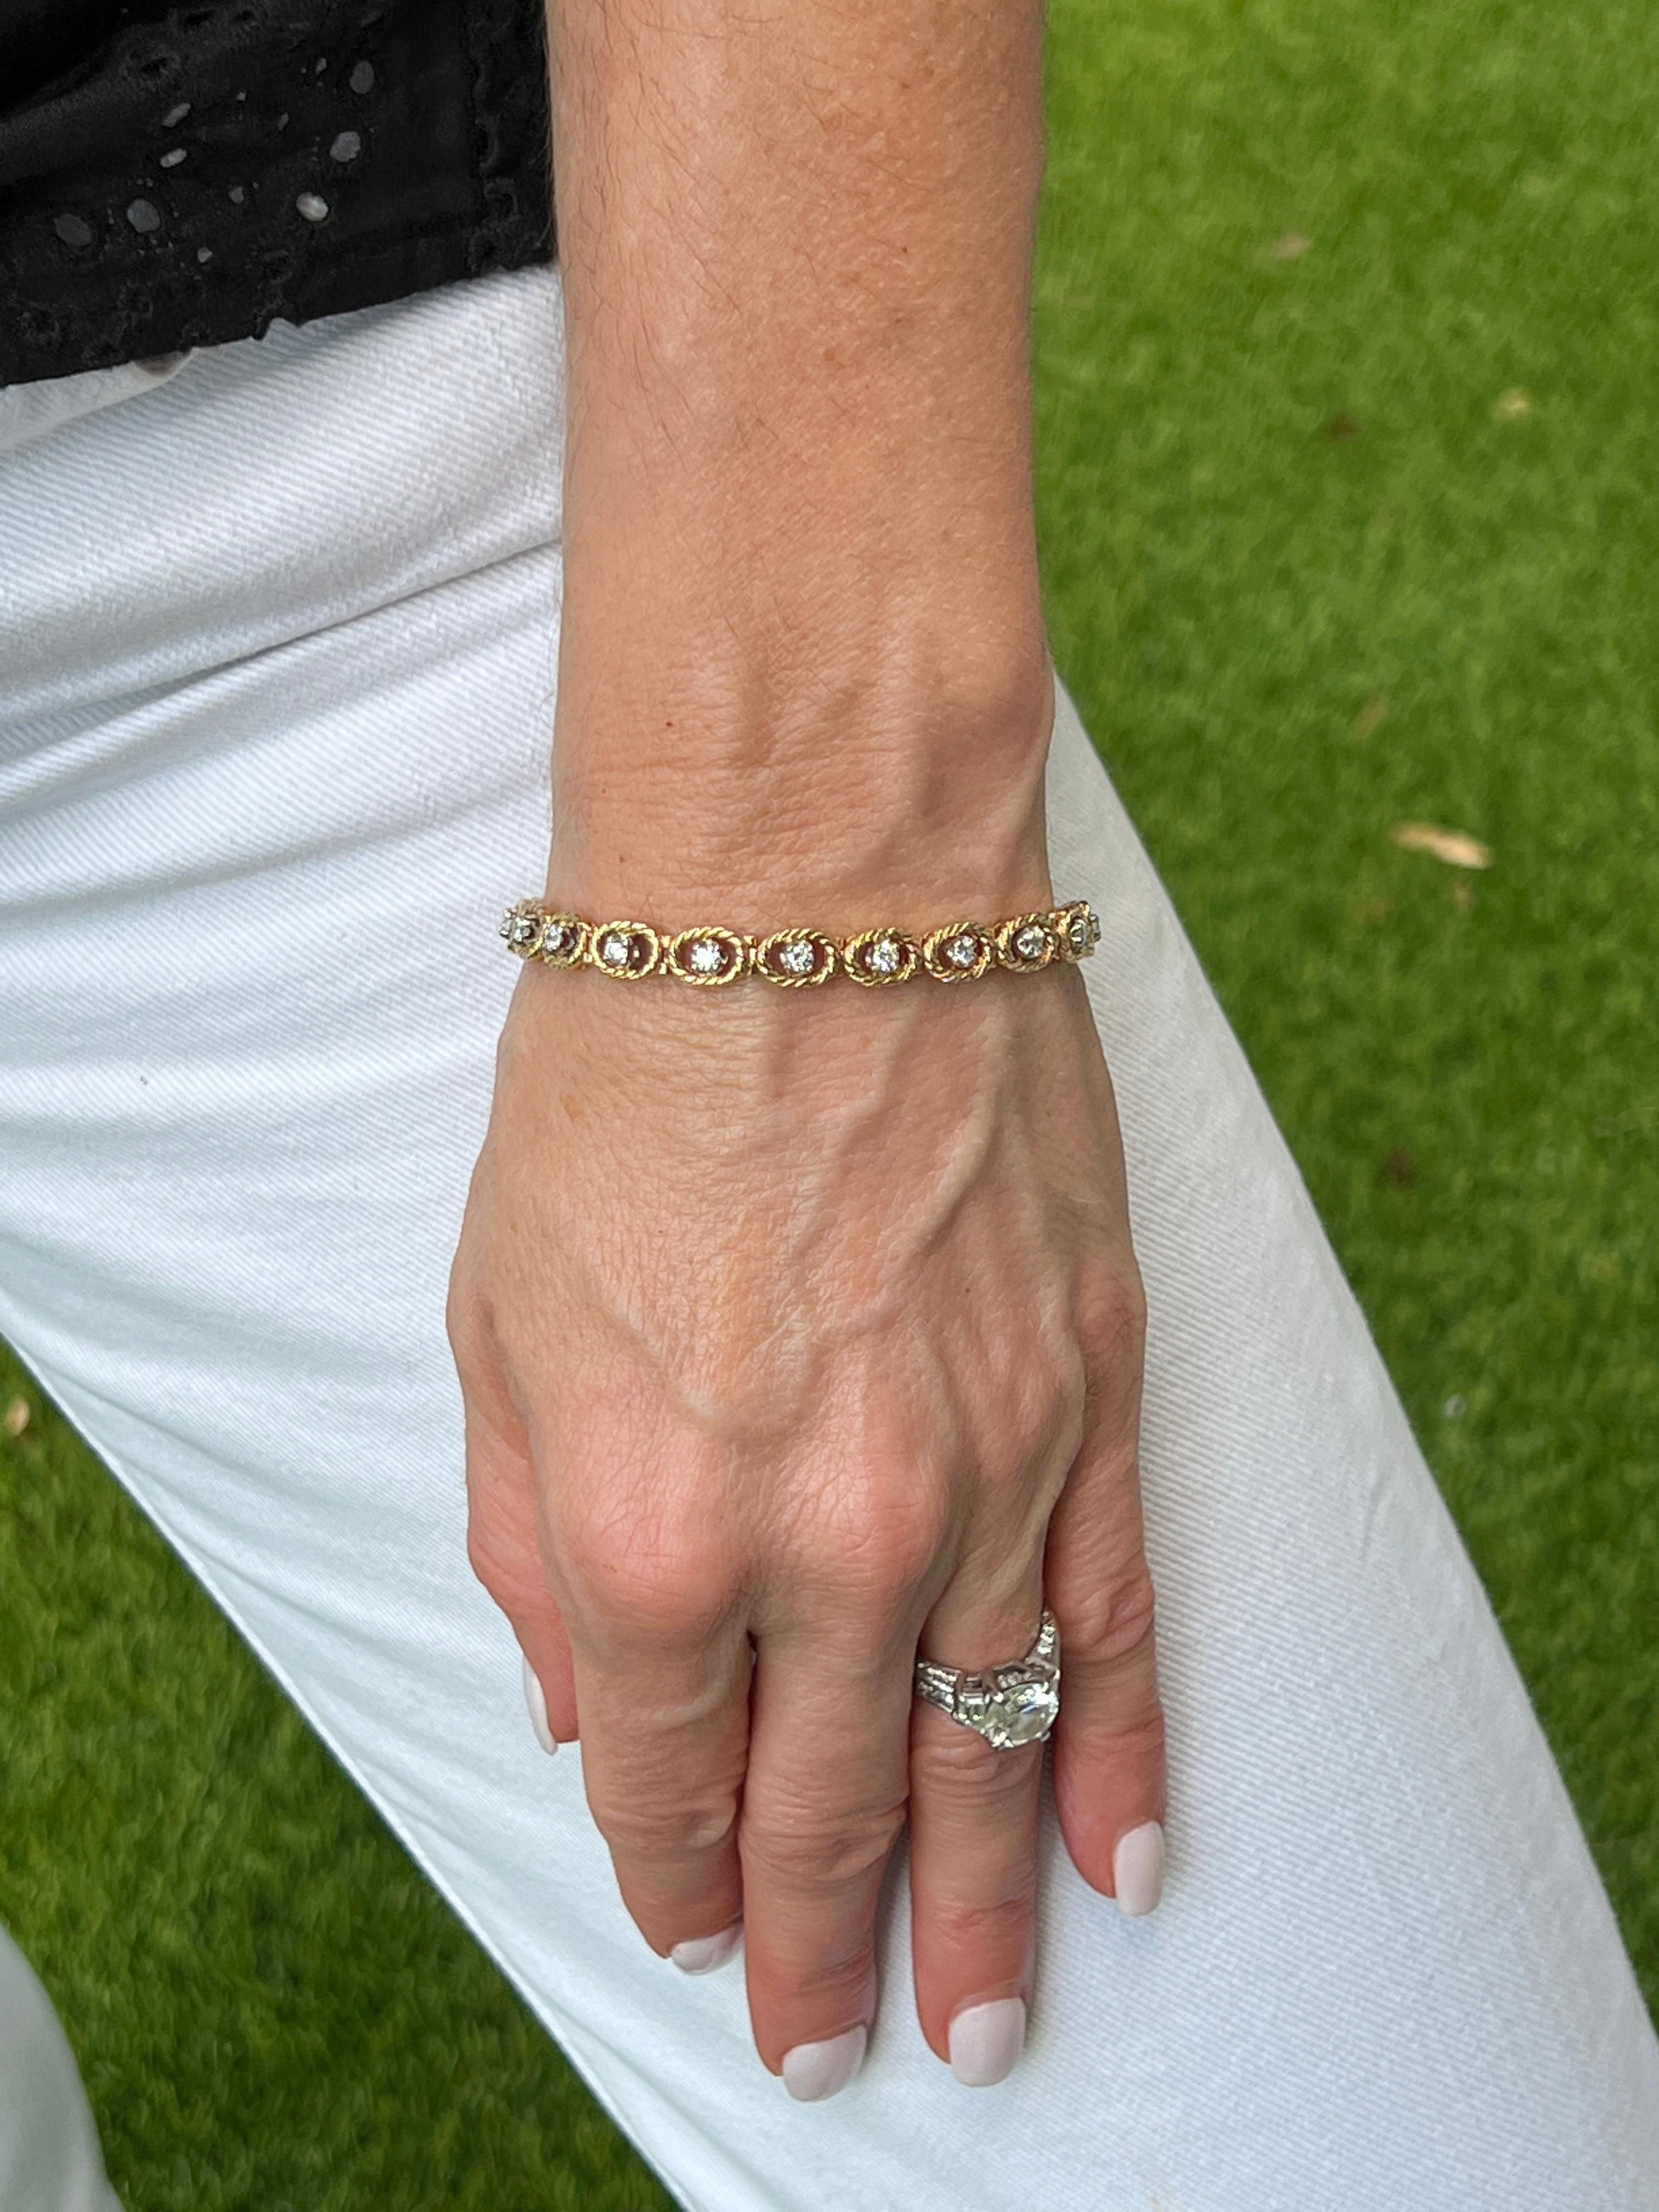 Diamond line bracelet fashioned in 14 karat yellow gold. The 18 round brilliant cut diamonds weigh approximately 1.00 CTW and are graded G-H color and VS2-SI1 color. The diamonds are surrounded by a thin gold rope design and the bracelet measures 7